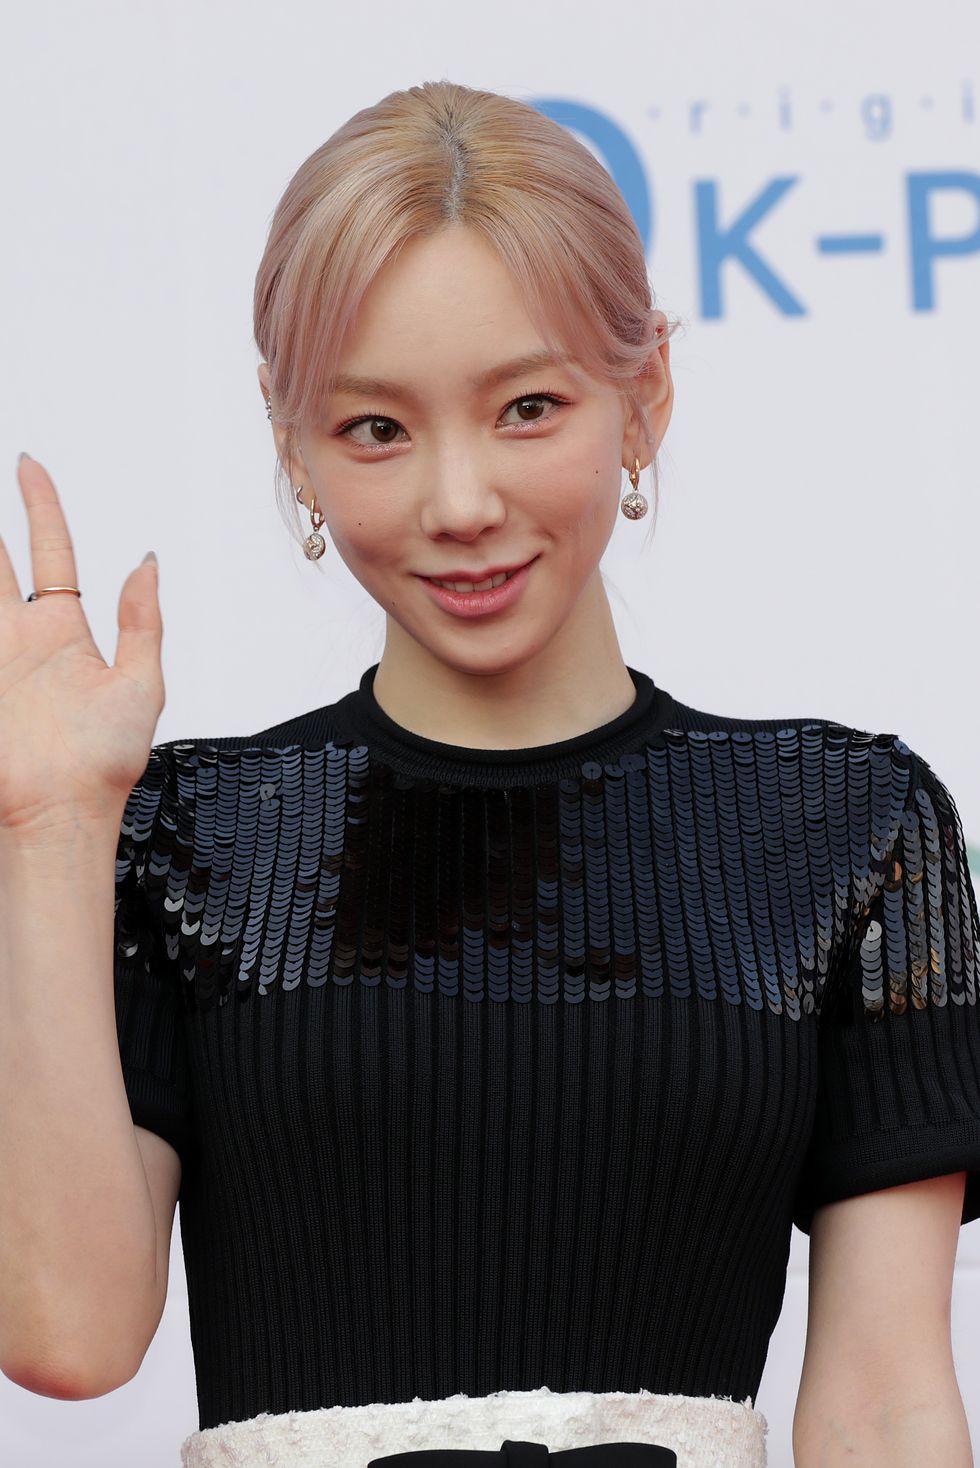 the 11th gaon chart music awards in seoul   photocall